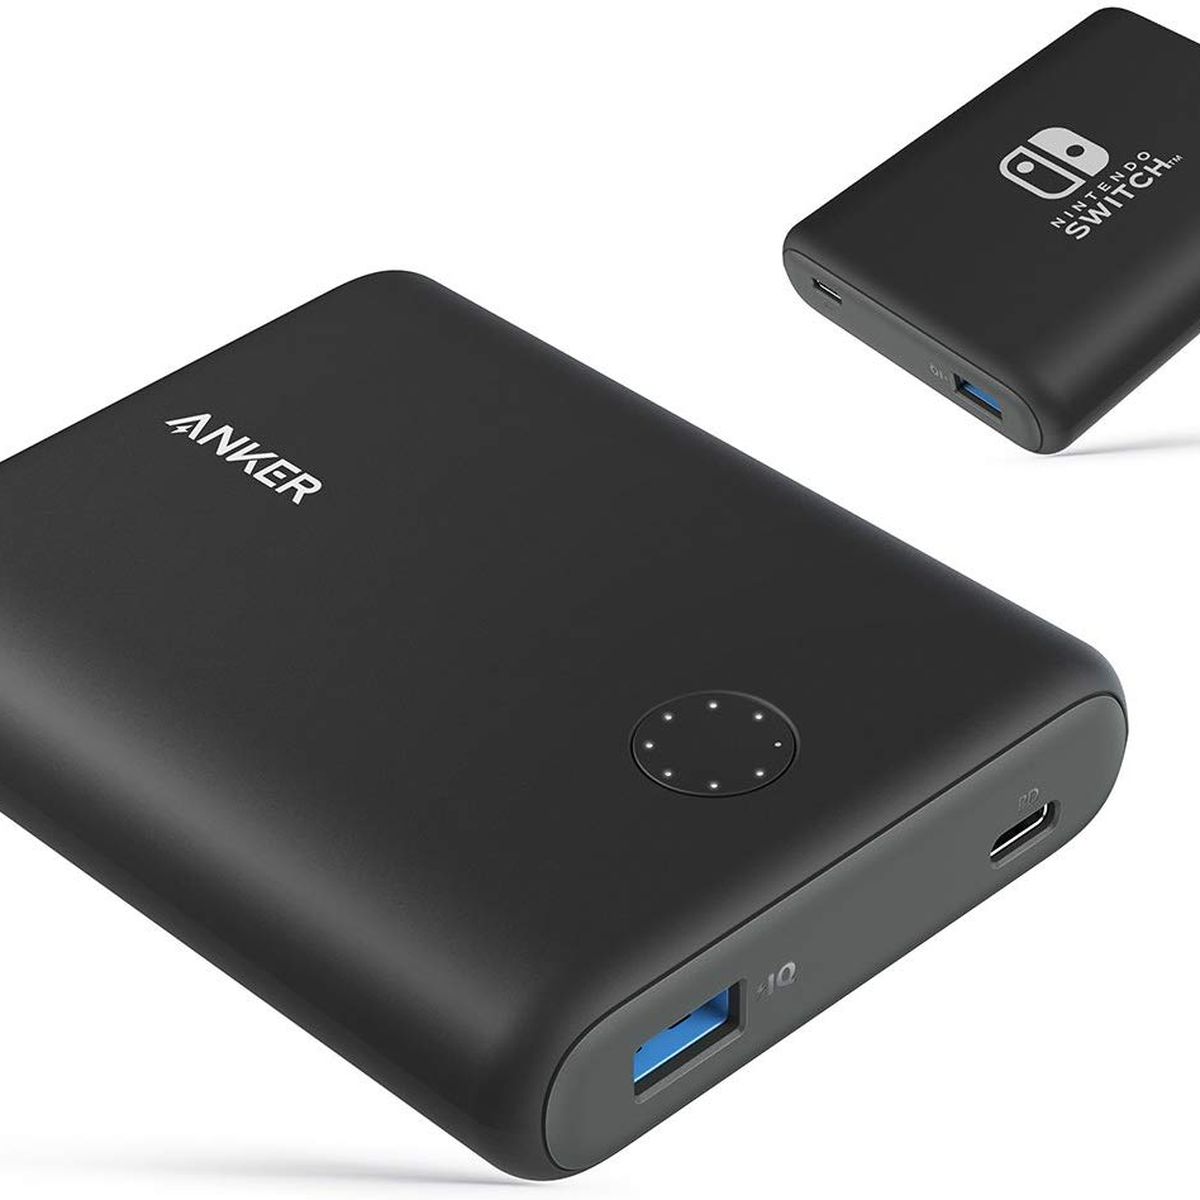 Product shot of Anker’s PowerCore 13400 portable charger with the Nintendo Switch logo embossed on the side